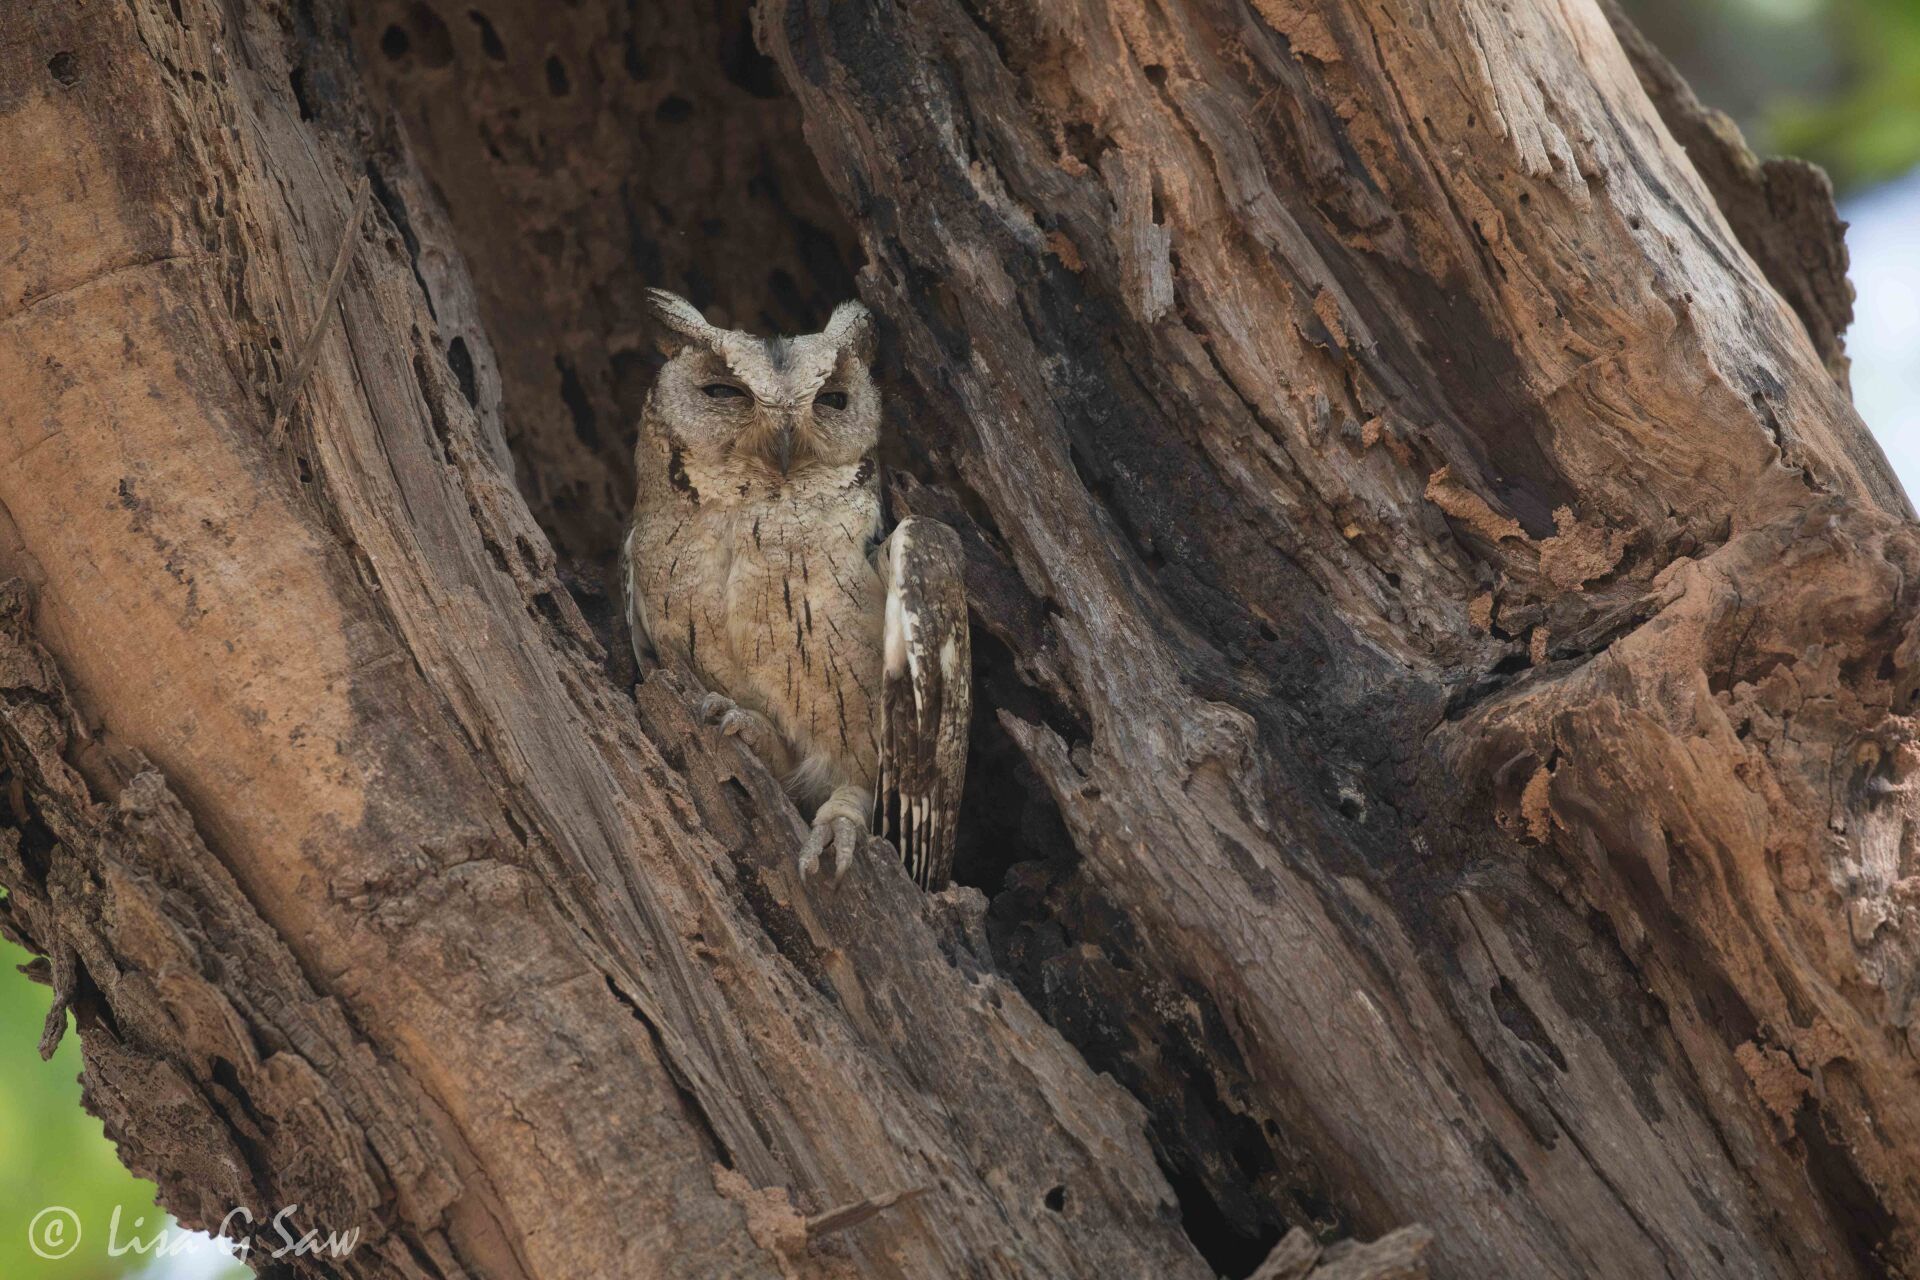 Indian Scops Owl blending in with wood of tree trunk